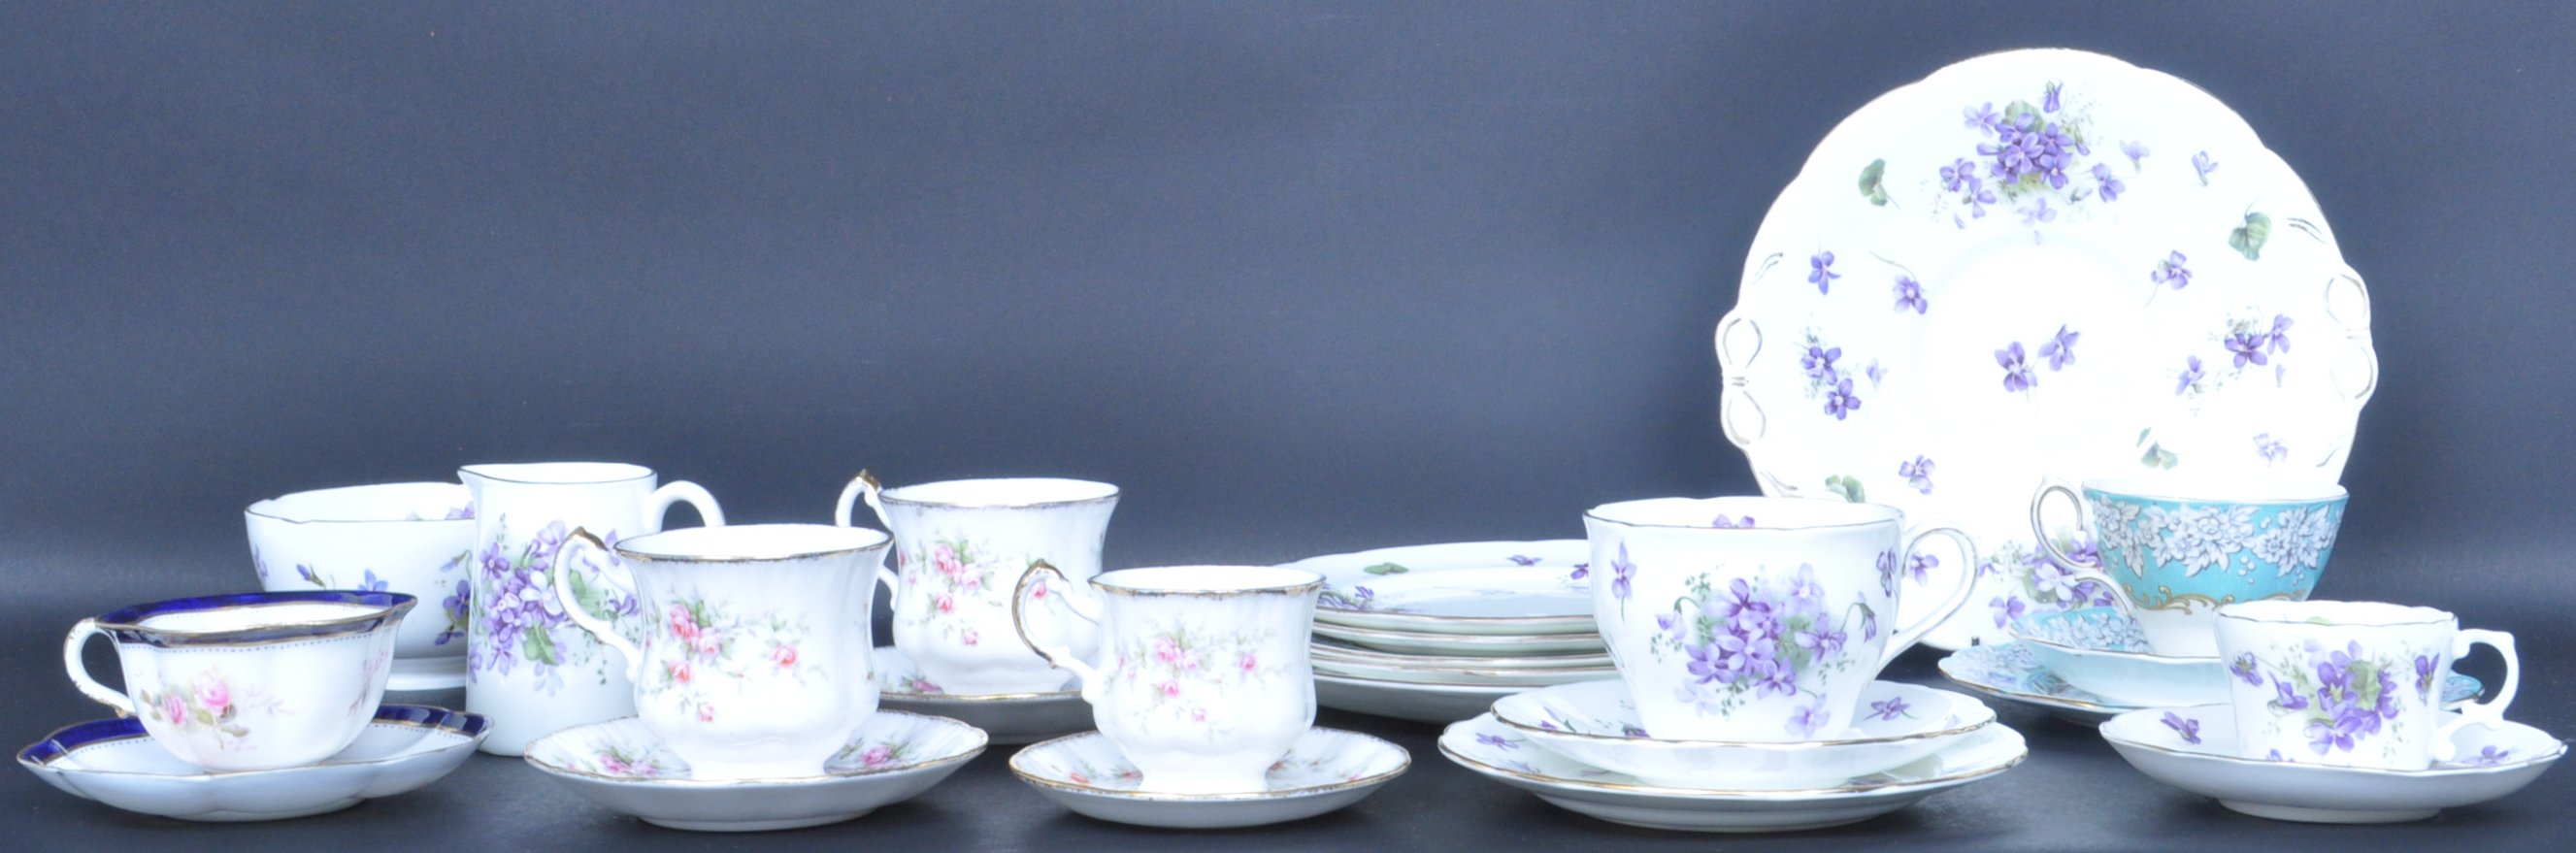 COLLECTION OF VINTAGE 20TH CENTURY CHINA TABLEWARES